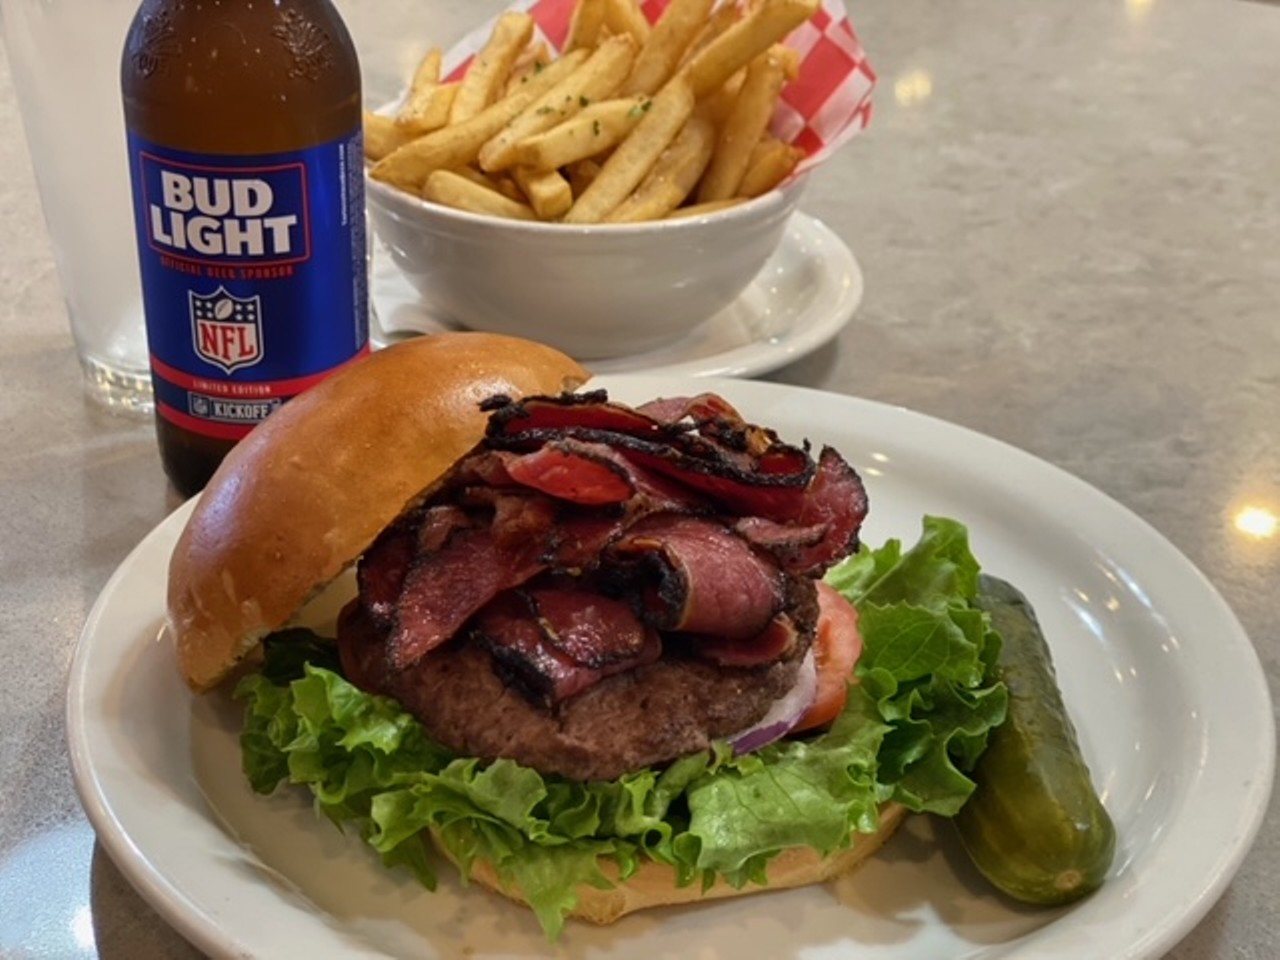 Max & Louie's New York Diner
Dine-In, Curbside and Pick-up, 226 West Bitters Rd., (210) 483-7600, maxandlouiesdiner.comE
New York Deli Burger, $8, 1/4 lb. ground beef topped with sliced pastrami on a house-baked brioche bun. 
Photo courtesy of Max & Louie's New York Diner